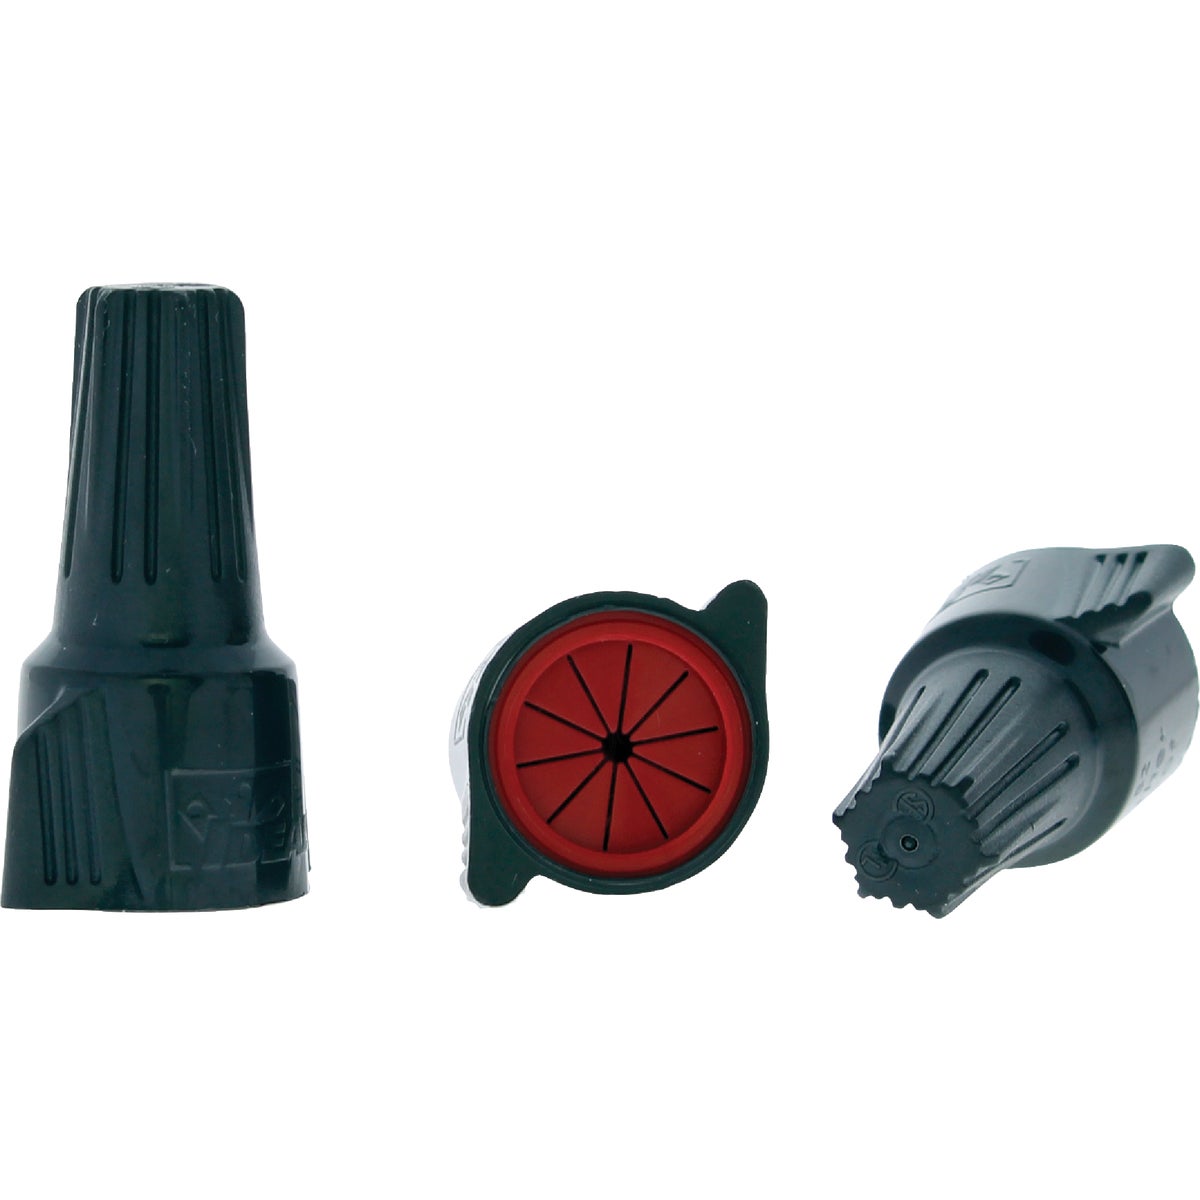 Item 500652, Weatherproof wire connectors designed specifically for above-grade, 